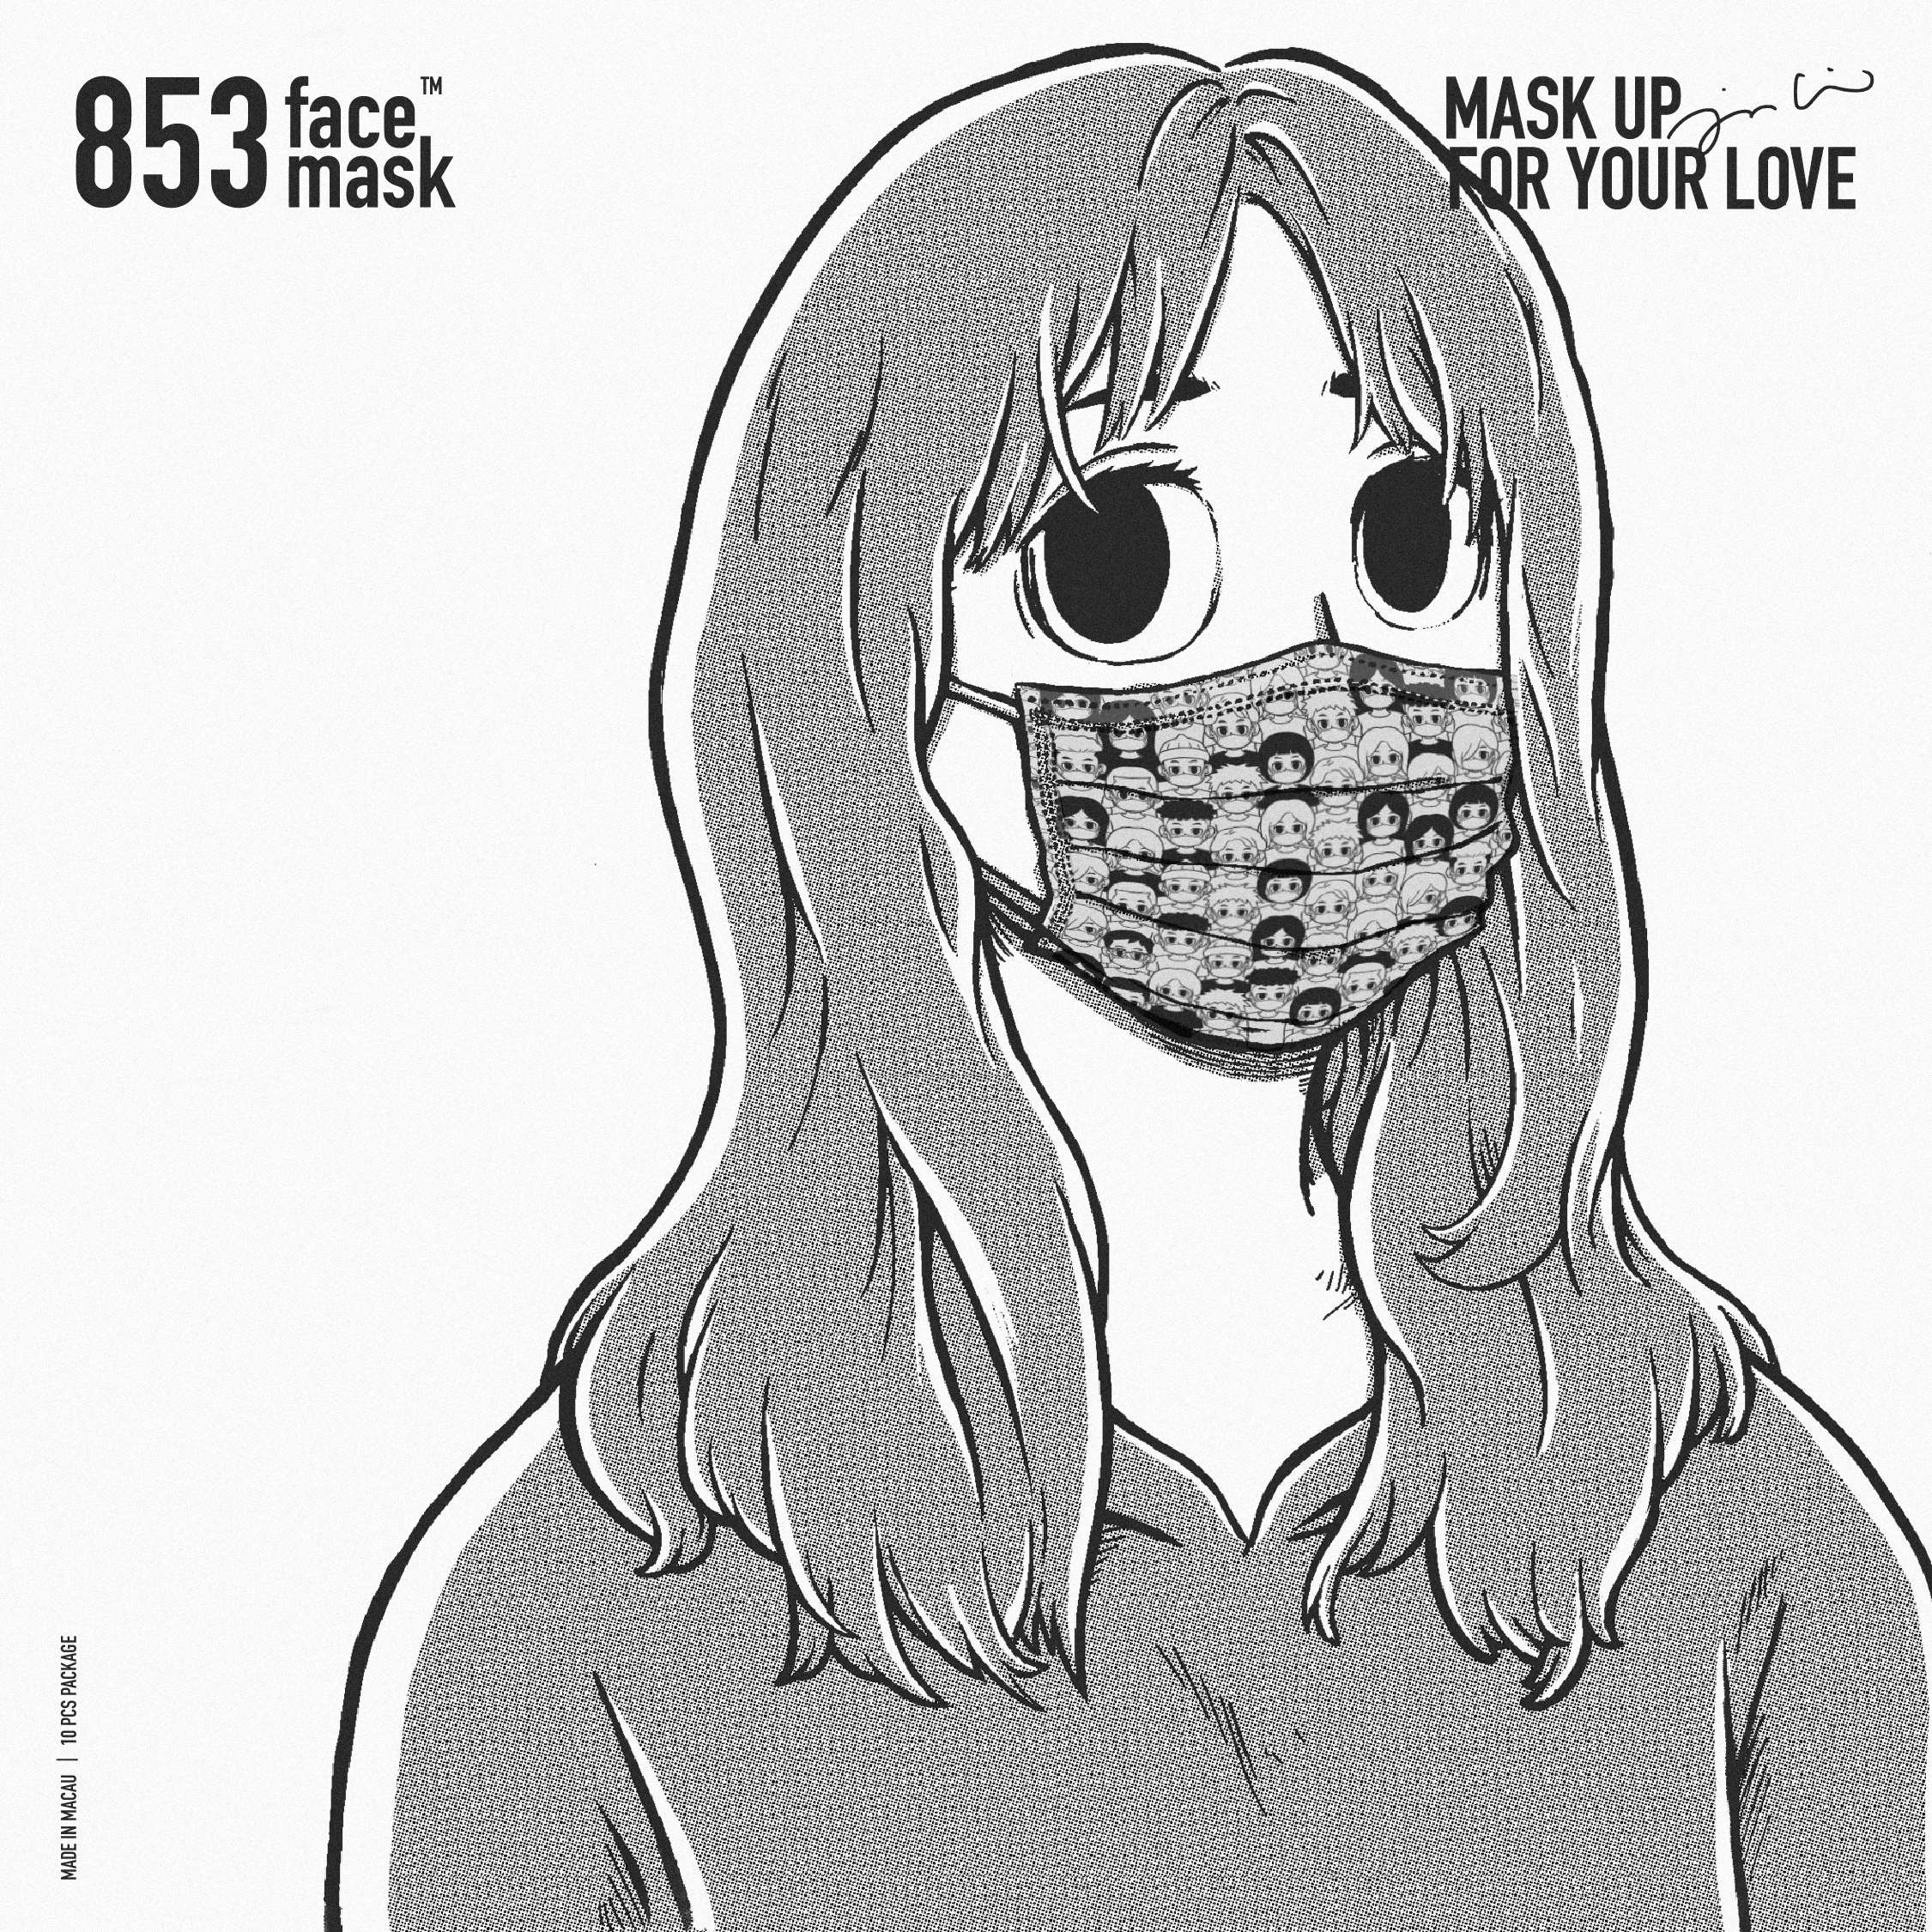 ASTM Level 3 口罩（853 Face Mask™️ x Jin Lio MASK UP FOR YOUR LOVE）非獨立包裝10片